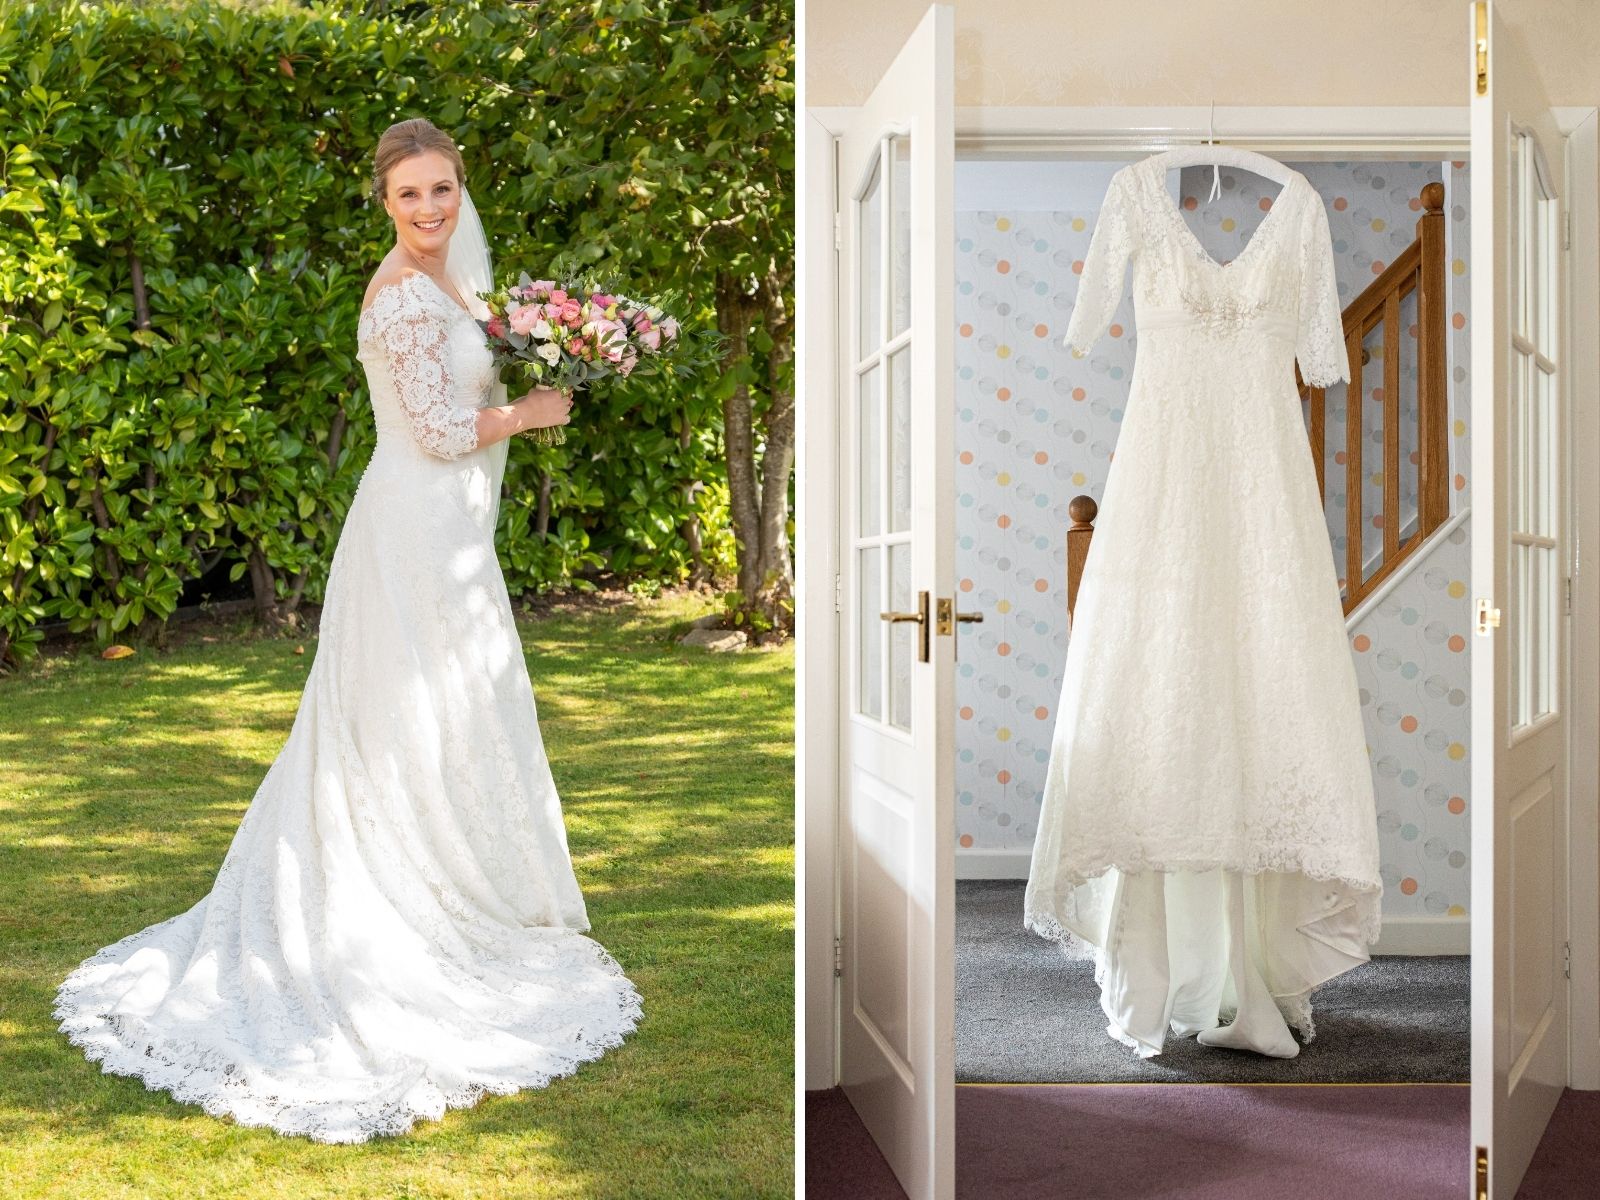 Rachel wearing a sleeved lave Millie May wedding dress from Boho Bride Boutique